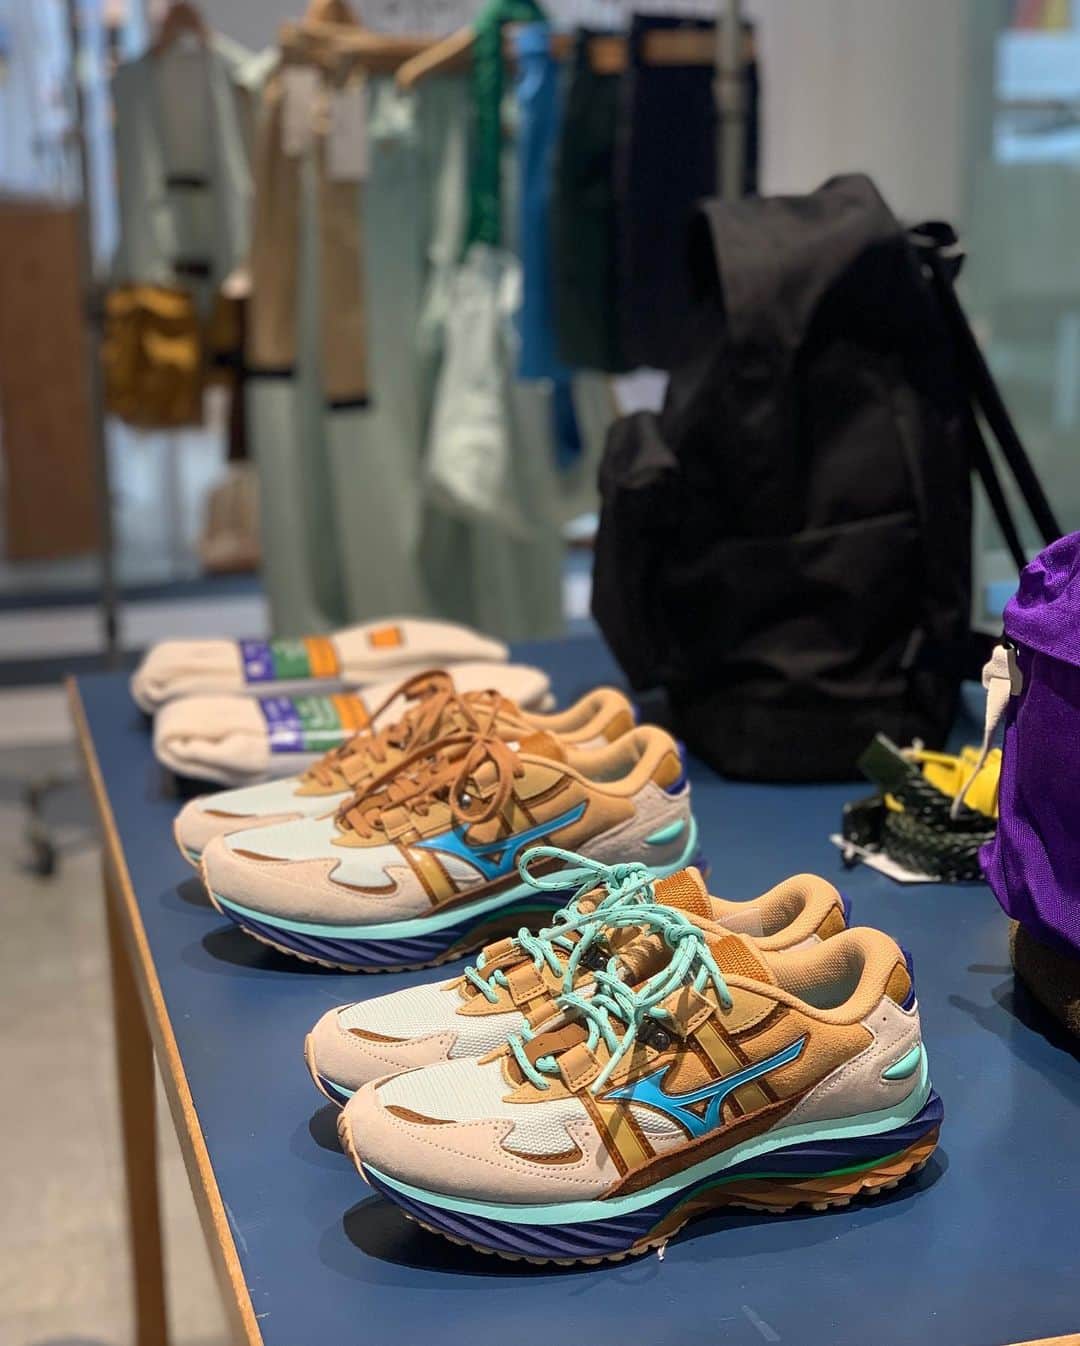 MIZUNO1906 Official Accountさんのインスタグラム写真 - (MIZUNO1906 Official AccountInstagram)「【MIZUNO×DIGAWEL】 〝渋谷PARCO POP UP SHOP 〟 ⁡ 『WAVE RIDER β DIGAWEL』の発売にあたりPOP UP SHOPを開催します。 ⁡ DIGAWELデザイナー西村浩平が期間中は毎日在店します。 UNION×DIGAWEL”BETA COLLECTION”のアイテム以外にもDIGAWEL 23SSシーズンの商品も店頭に並びます。 また、WAVE RIDER β DIGAWELのレディースサイズは渋谷PARCOのみでの販売となります。(レディースサイズは23.5/24.0のみ) デザイナーと直接会える貴重な機会となりますのでぜひお越しください。 ⁡ 期間 2023/4/28(Fri)~5/5(Fri) ⁡ 店舗 渋谷PARCO 2F BRIDGE POP UP SPACE ⁡ ⁡ #digawel  #DIGAWEL #渋谷パルコ #PARCO ⁡ POP UP SHOP at Shibuya PARCO, a "Designer You Can Go to See". ⁡ POP UP SHOP will be held on the occasion of the release of "WAVE RIDER β DIGAWEL". ⁡ DIGAWEL designer Kohei Nishimura will be at the store every day during the period. In addition to items from the UNION×DIGAWEL "BETA COLLECTION", products from the DIGAWEL 23SS season will also be available at the store. WAVE RIDER β DIGAWEL women's sizes will be sold only at Shibuya PARCO. (Women's size is 23.5/24.0 only) This will be a rare opportunity to meet the designer in person, so please come and visit us. ⁡ Date April 28 (Fri) - May 5 (Fri) ⁡ Store Shibuya PARCO 2F BRIDGE POP UP SPACE  #union #uniontokyo  #Mizuno #ミズノ #美津濃 #MizunoSportstyle #mizunotokyo #mizunoosaka #mizunokyoto #渋谷 #shibuyaparco #shibuyashopping @mizuno_sportstyle_jp  @digawel_official」4月28日 23時53分 - mizuno_sportstyle_jp